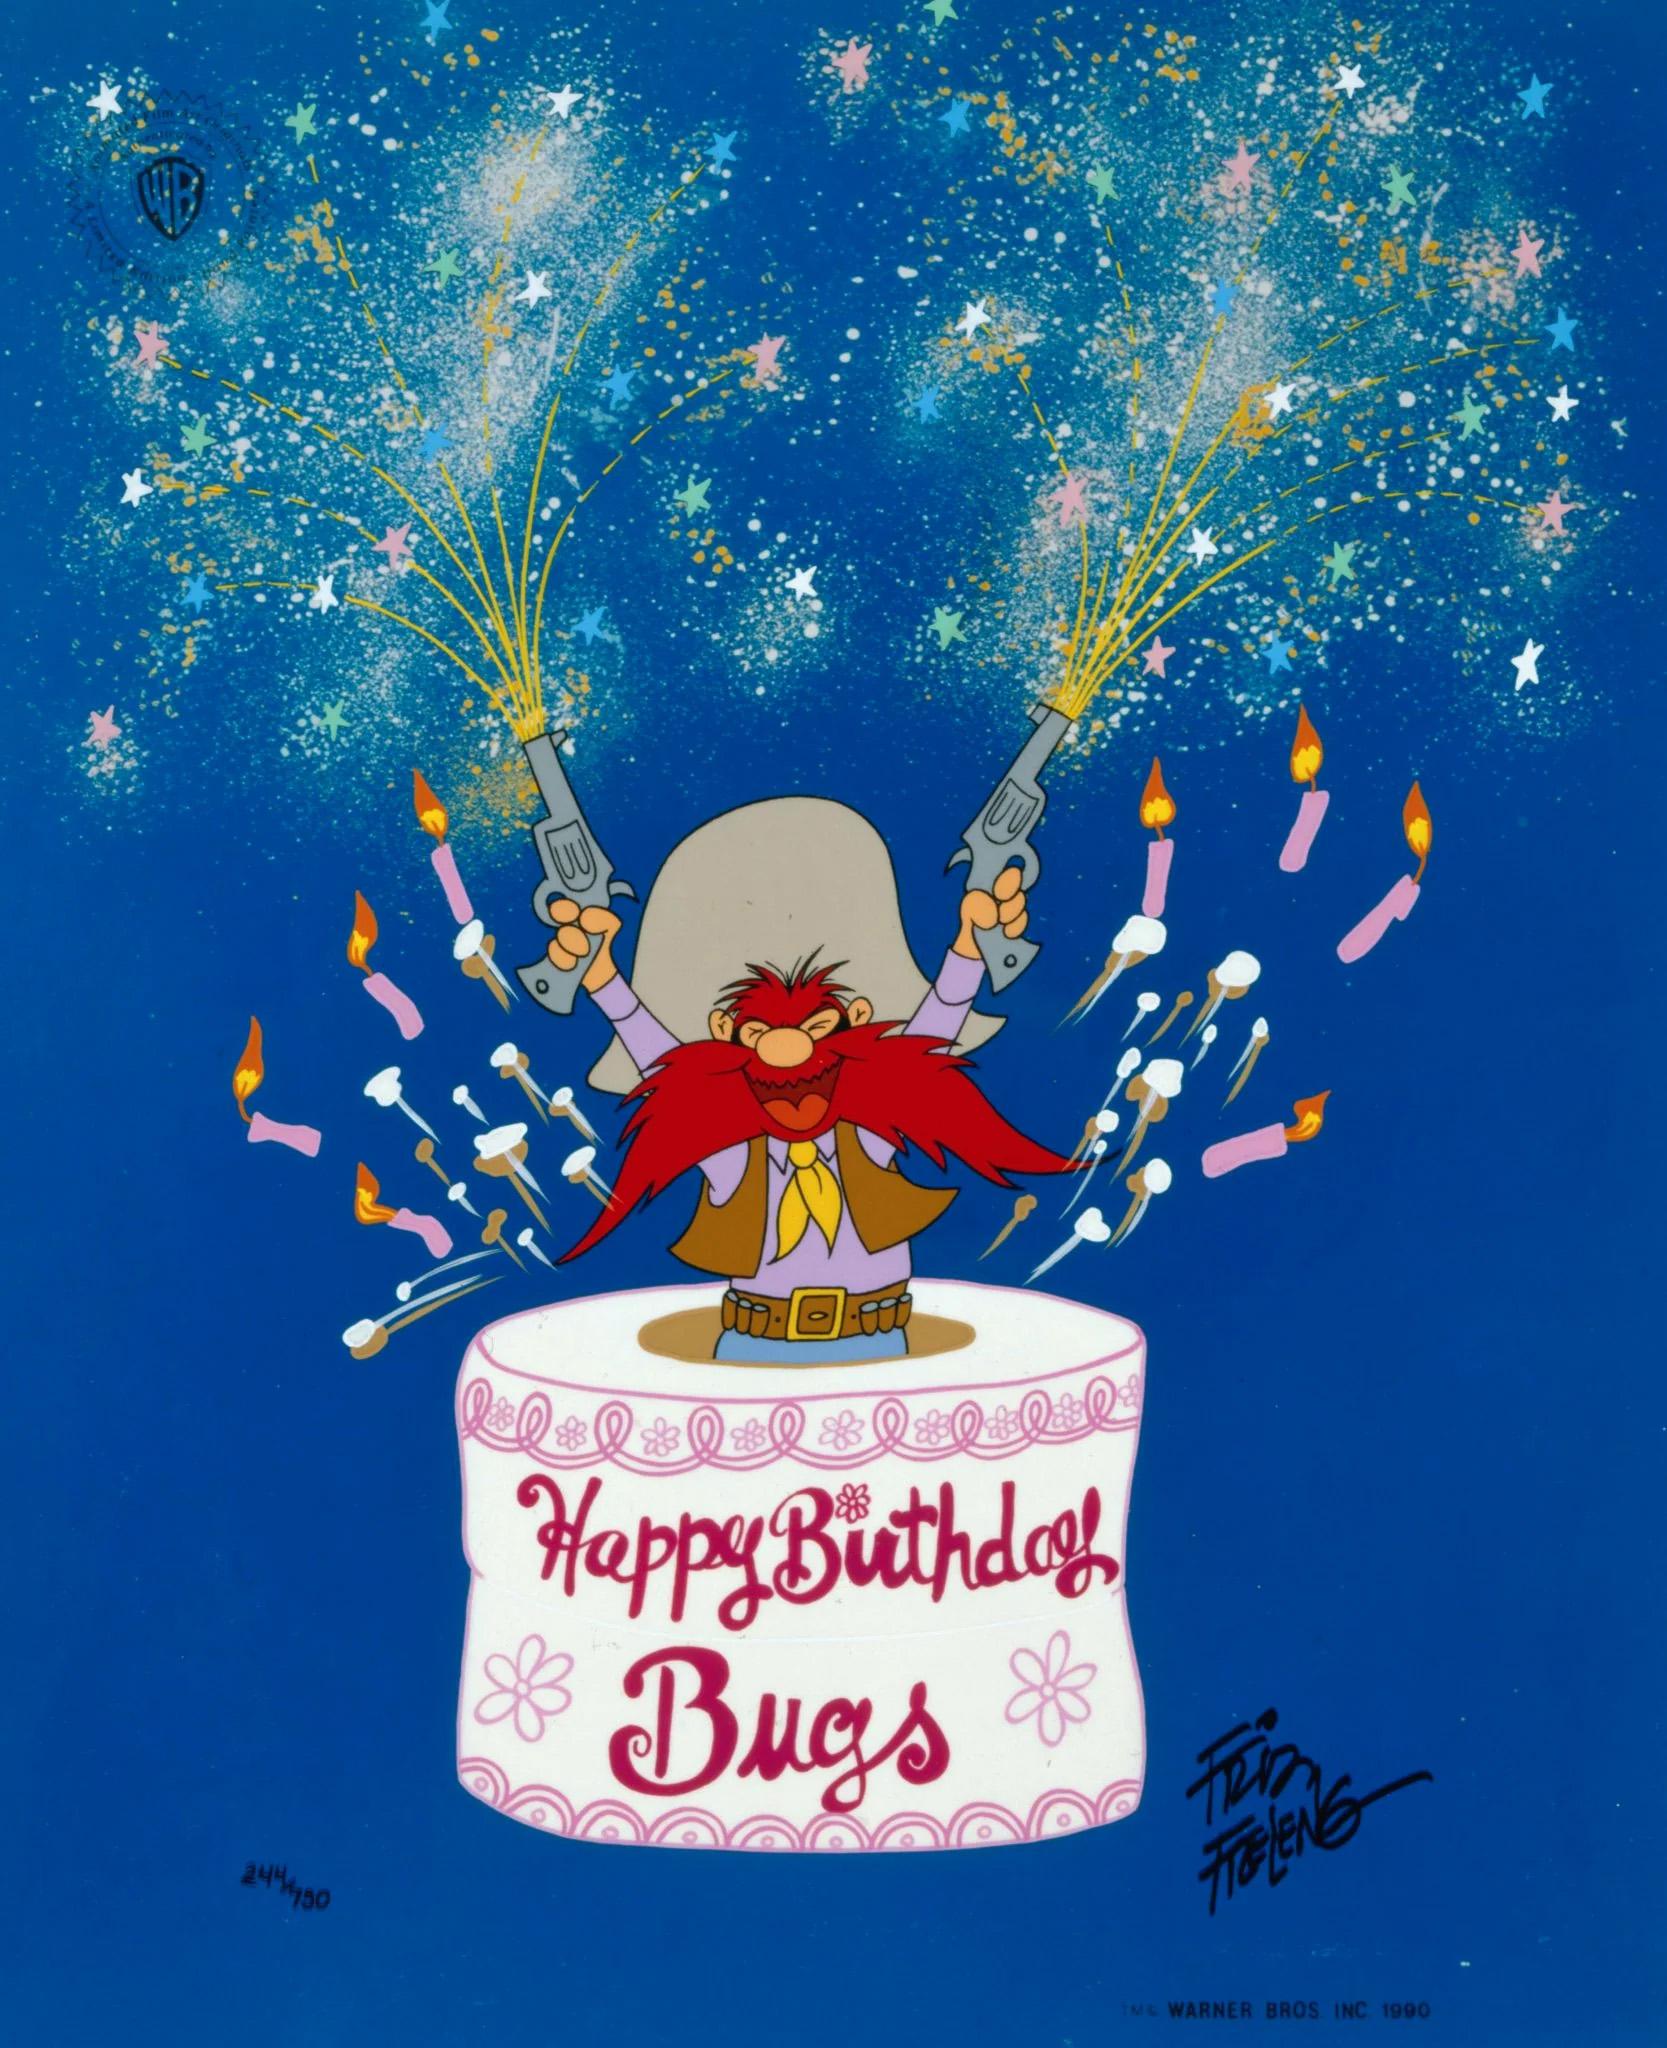 CELEBRATION

Signed by Friz Freleng

MEDIUM:  Limited Edition Cel
SIZE: 18" x 15"
EDITION SIZE: 750
ARTIST: Friz Freleng
SKU: FF1005

ABOUT THE IMAGE:  ﻿Yosemite Sam pops out of a birthday cake to wish Bugs a Root’n-Toot’n 50th Birthday, in this